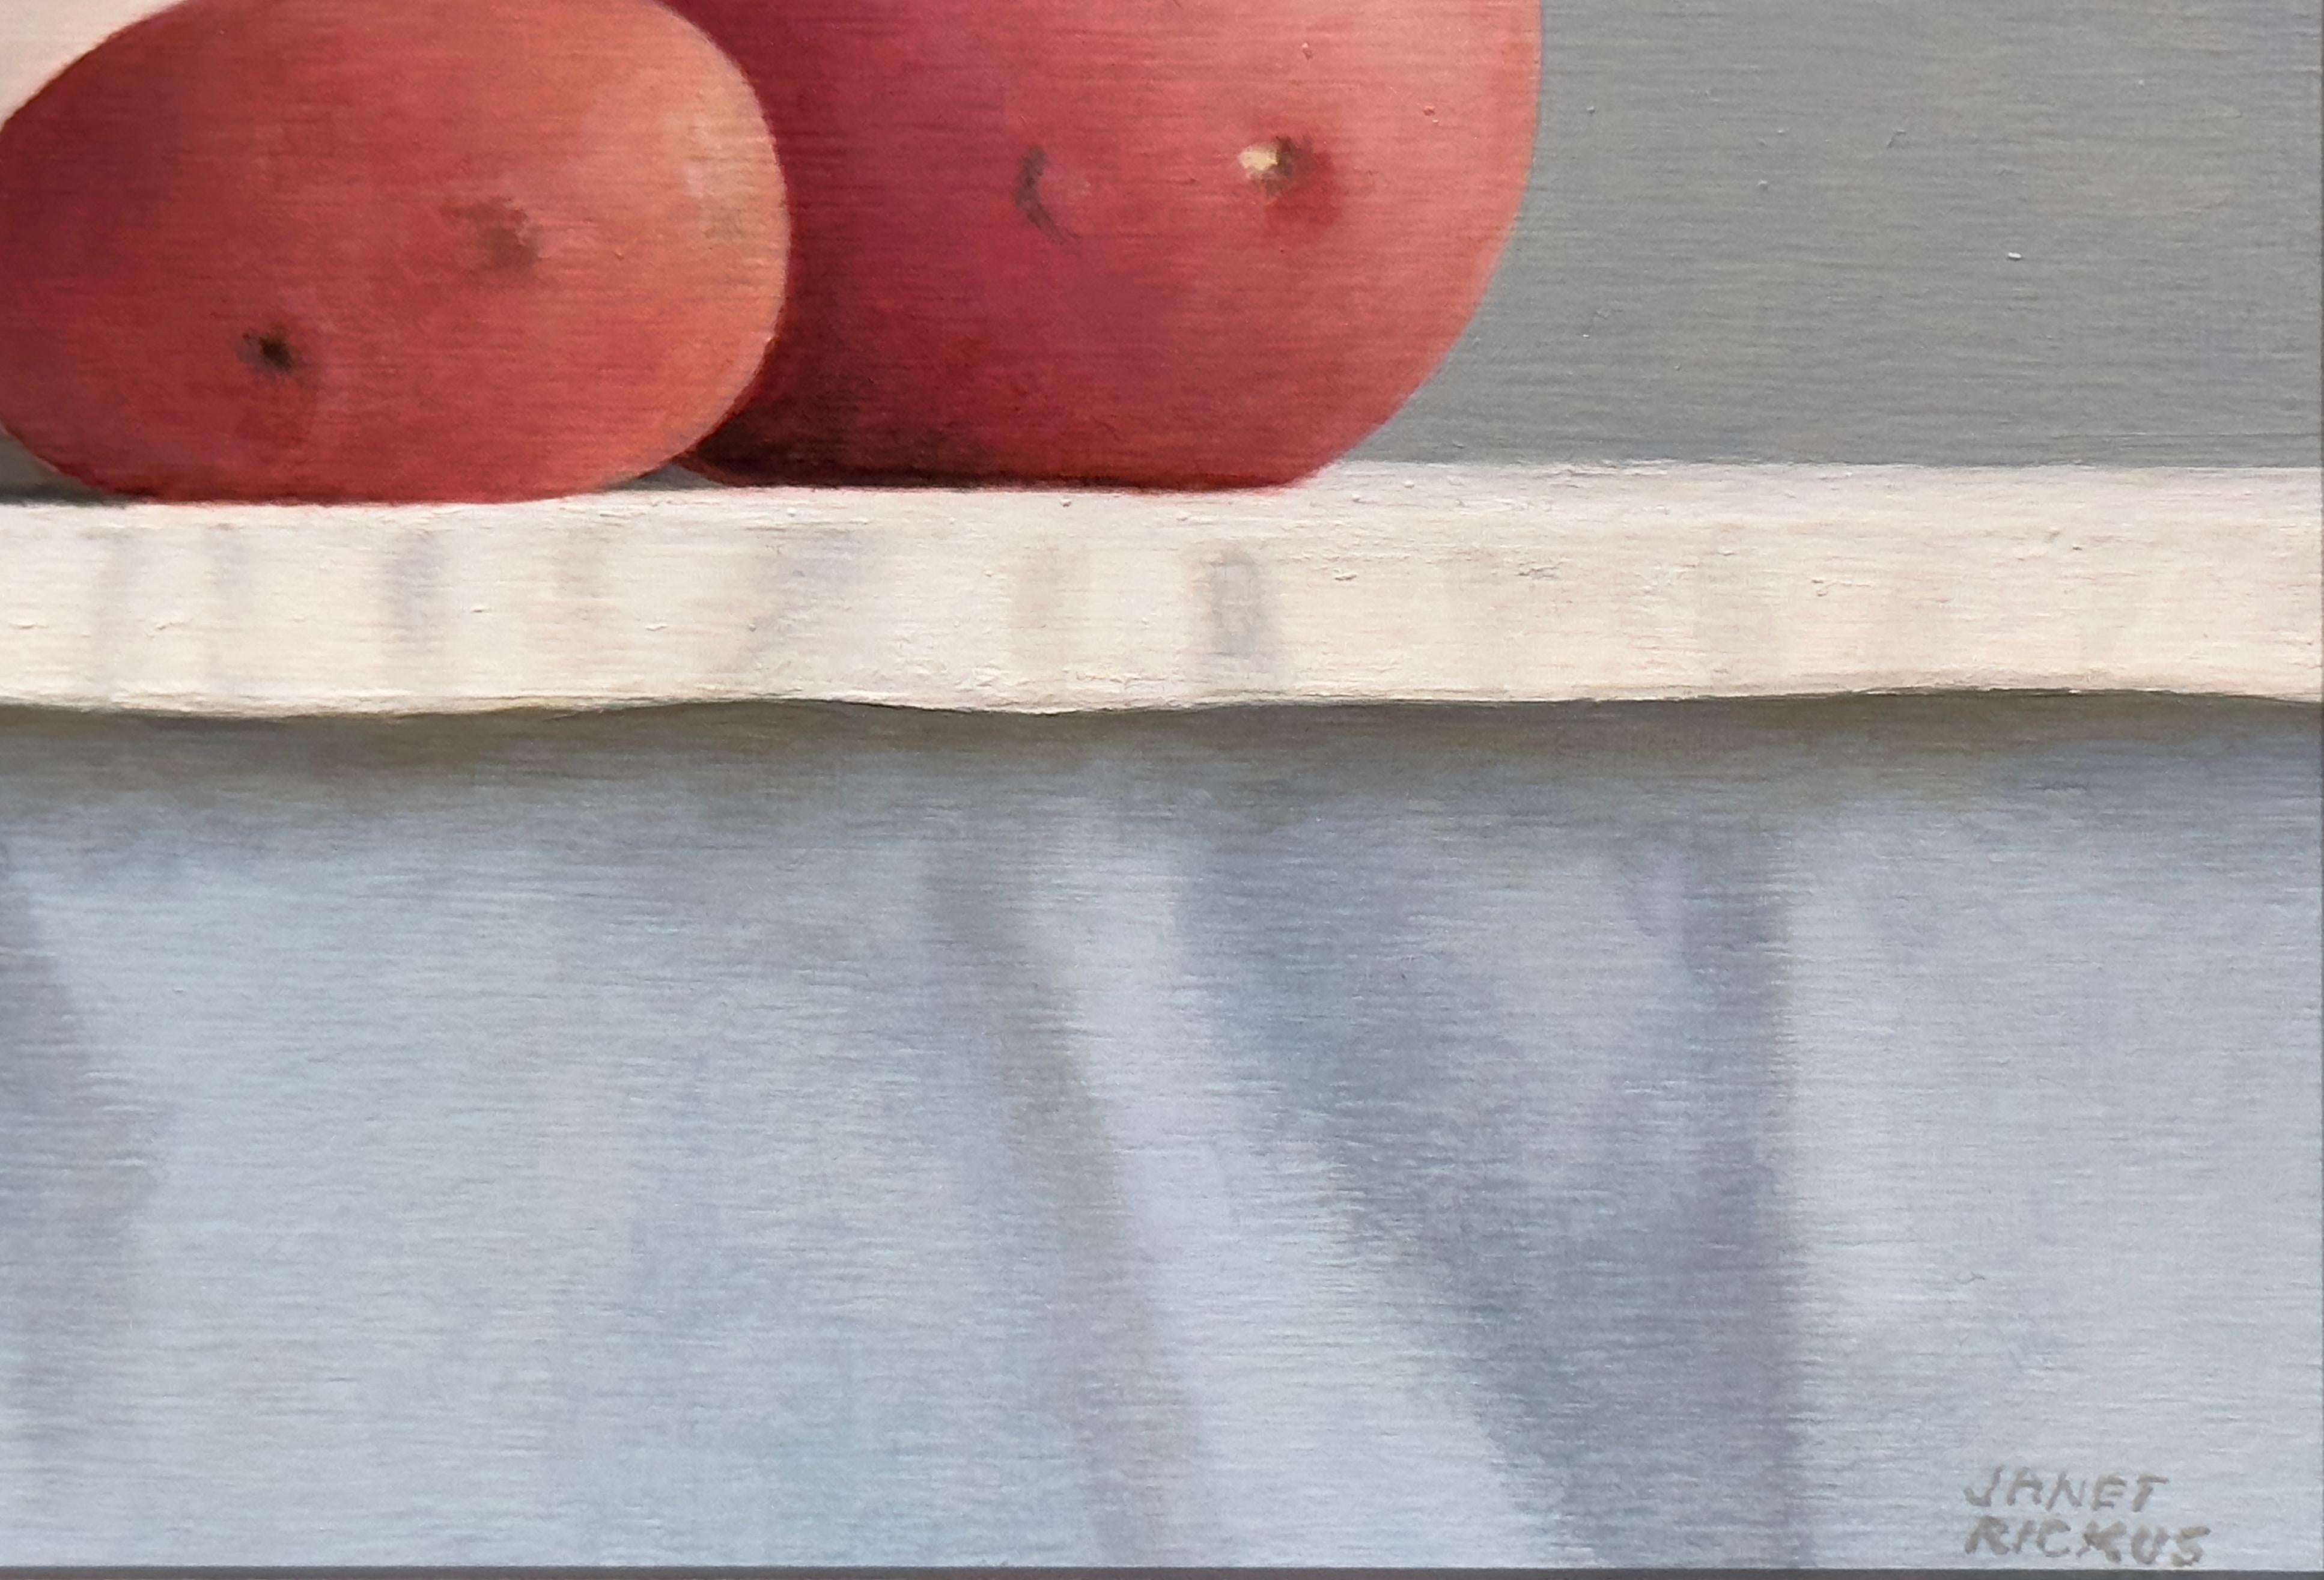 ROSE-RIMMED - Realism / Contemporary Kitchen Still Life / Potatoes For Sale 3